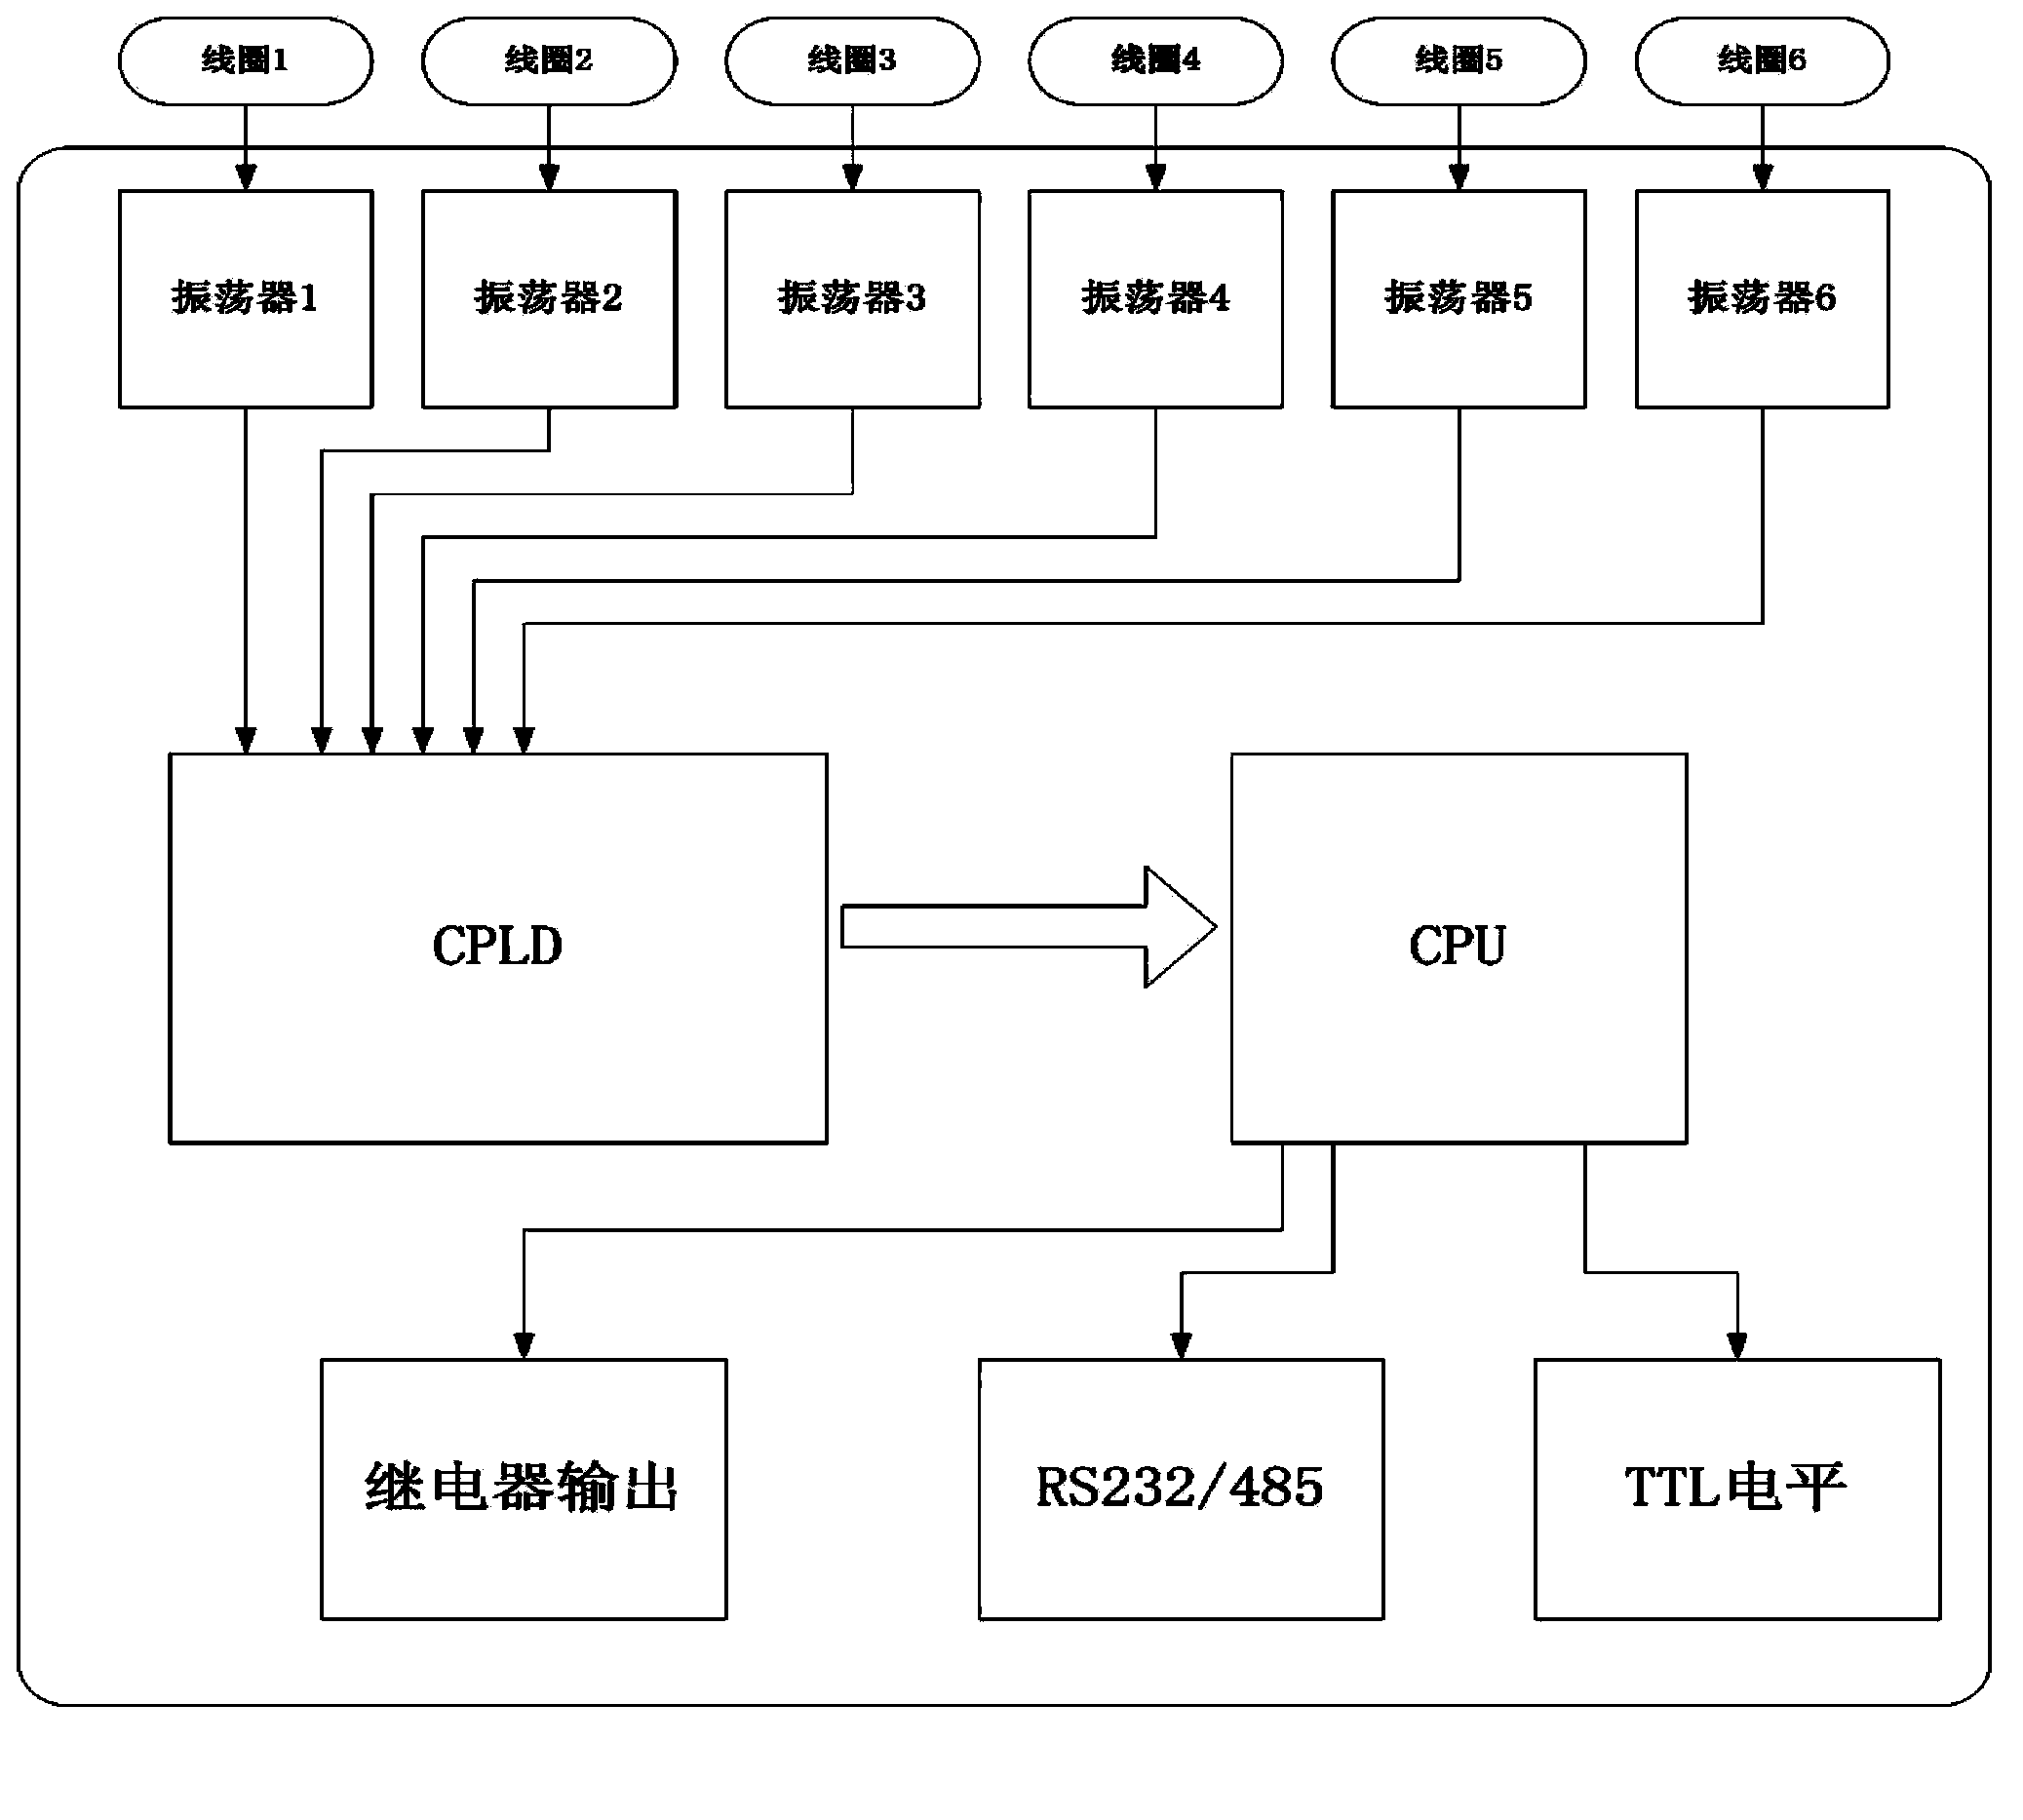 A motor vehicle characteristic data acquisition analyzer and analysis method